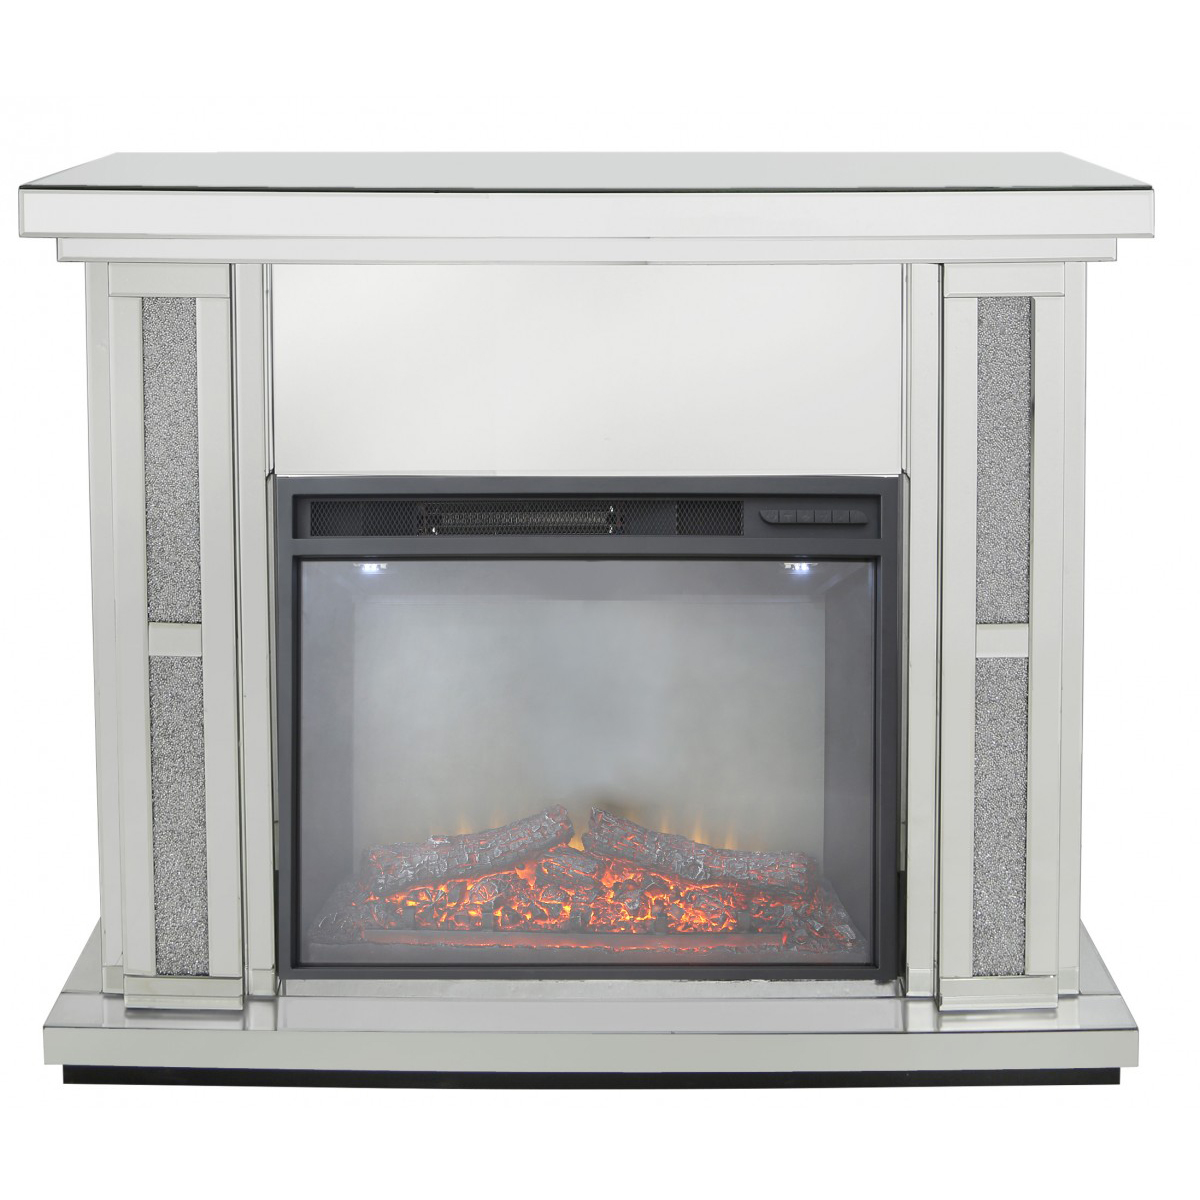 Madorra Copper Smoked Effect Fireplace Surround & Electric Fire Set